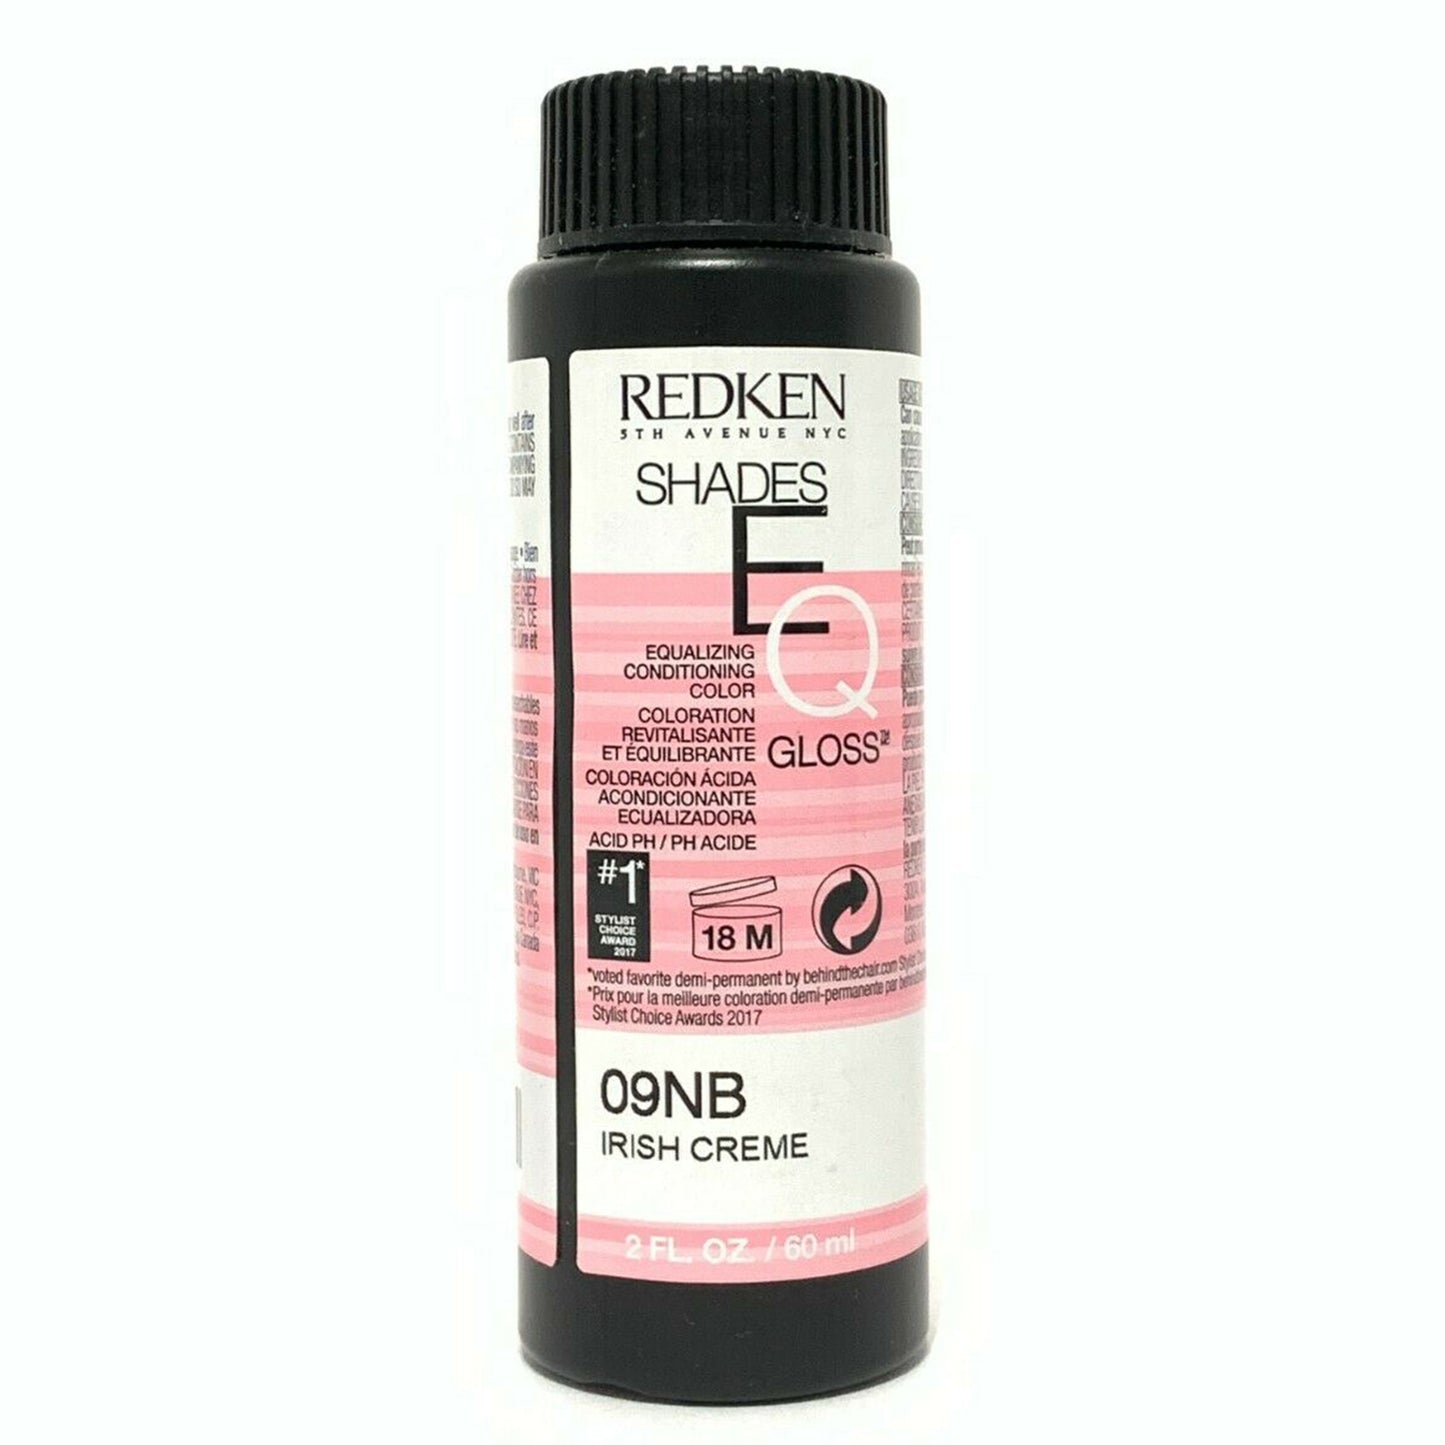 Redken Shades EQ Equalizing Conditioning Color Gloss 09nb - 60 ml / 2 oz